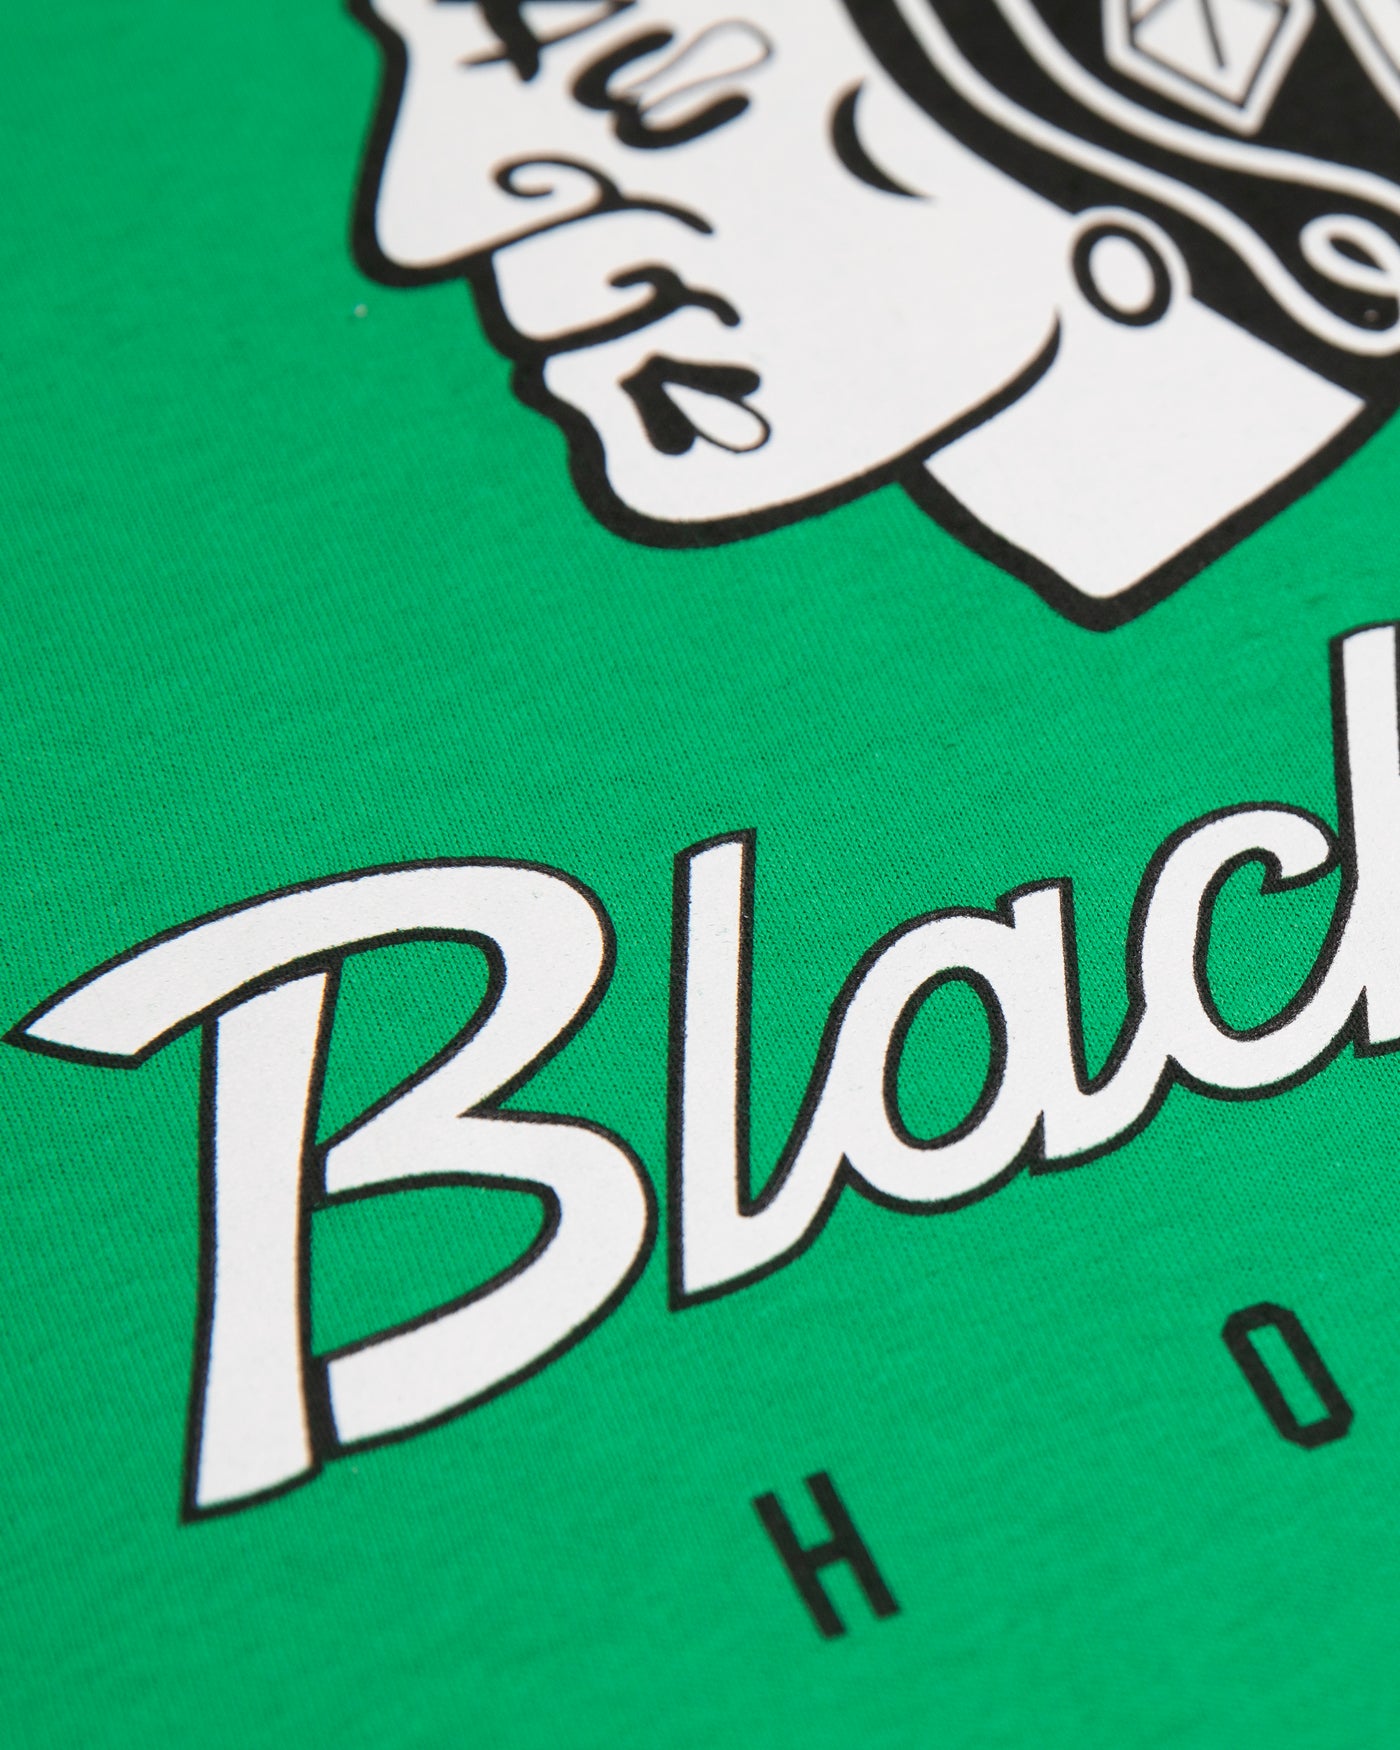 Green Chicago Blackhawks tee with black and white tonal primary logo and wordmark across chest - front lay flatGreen Chicago Blackhawks tee with black and white tonal primary logo and wordmark across chest - alt detail lay flat